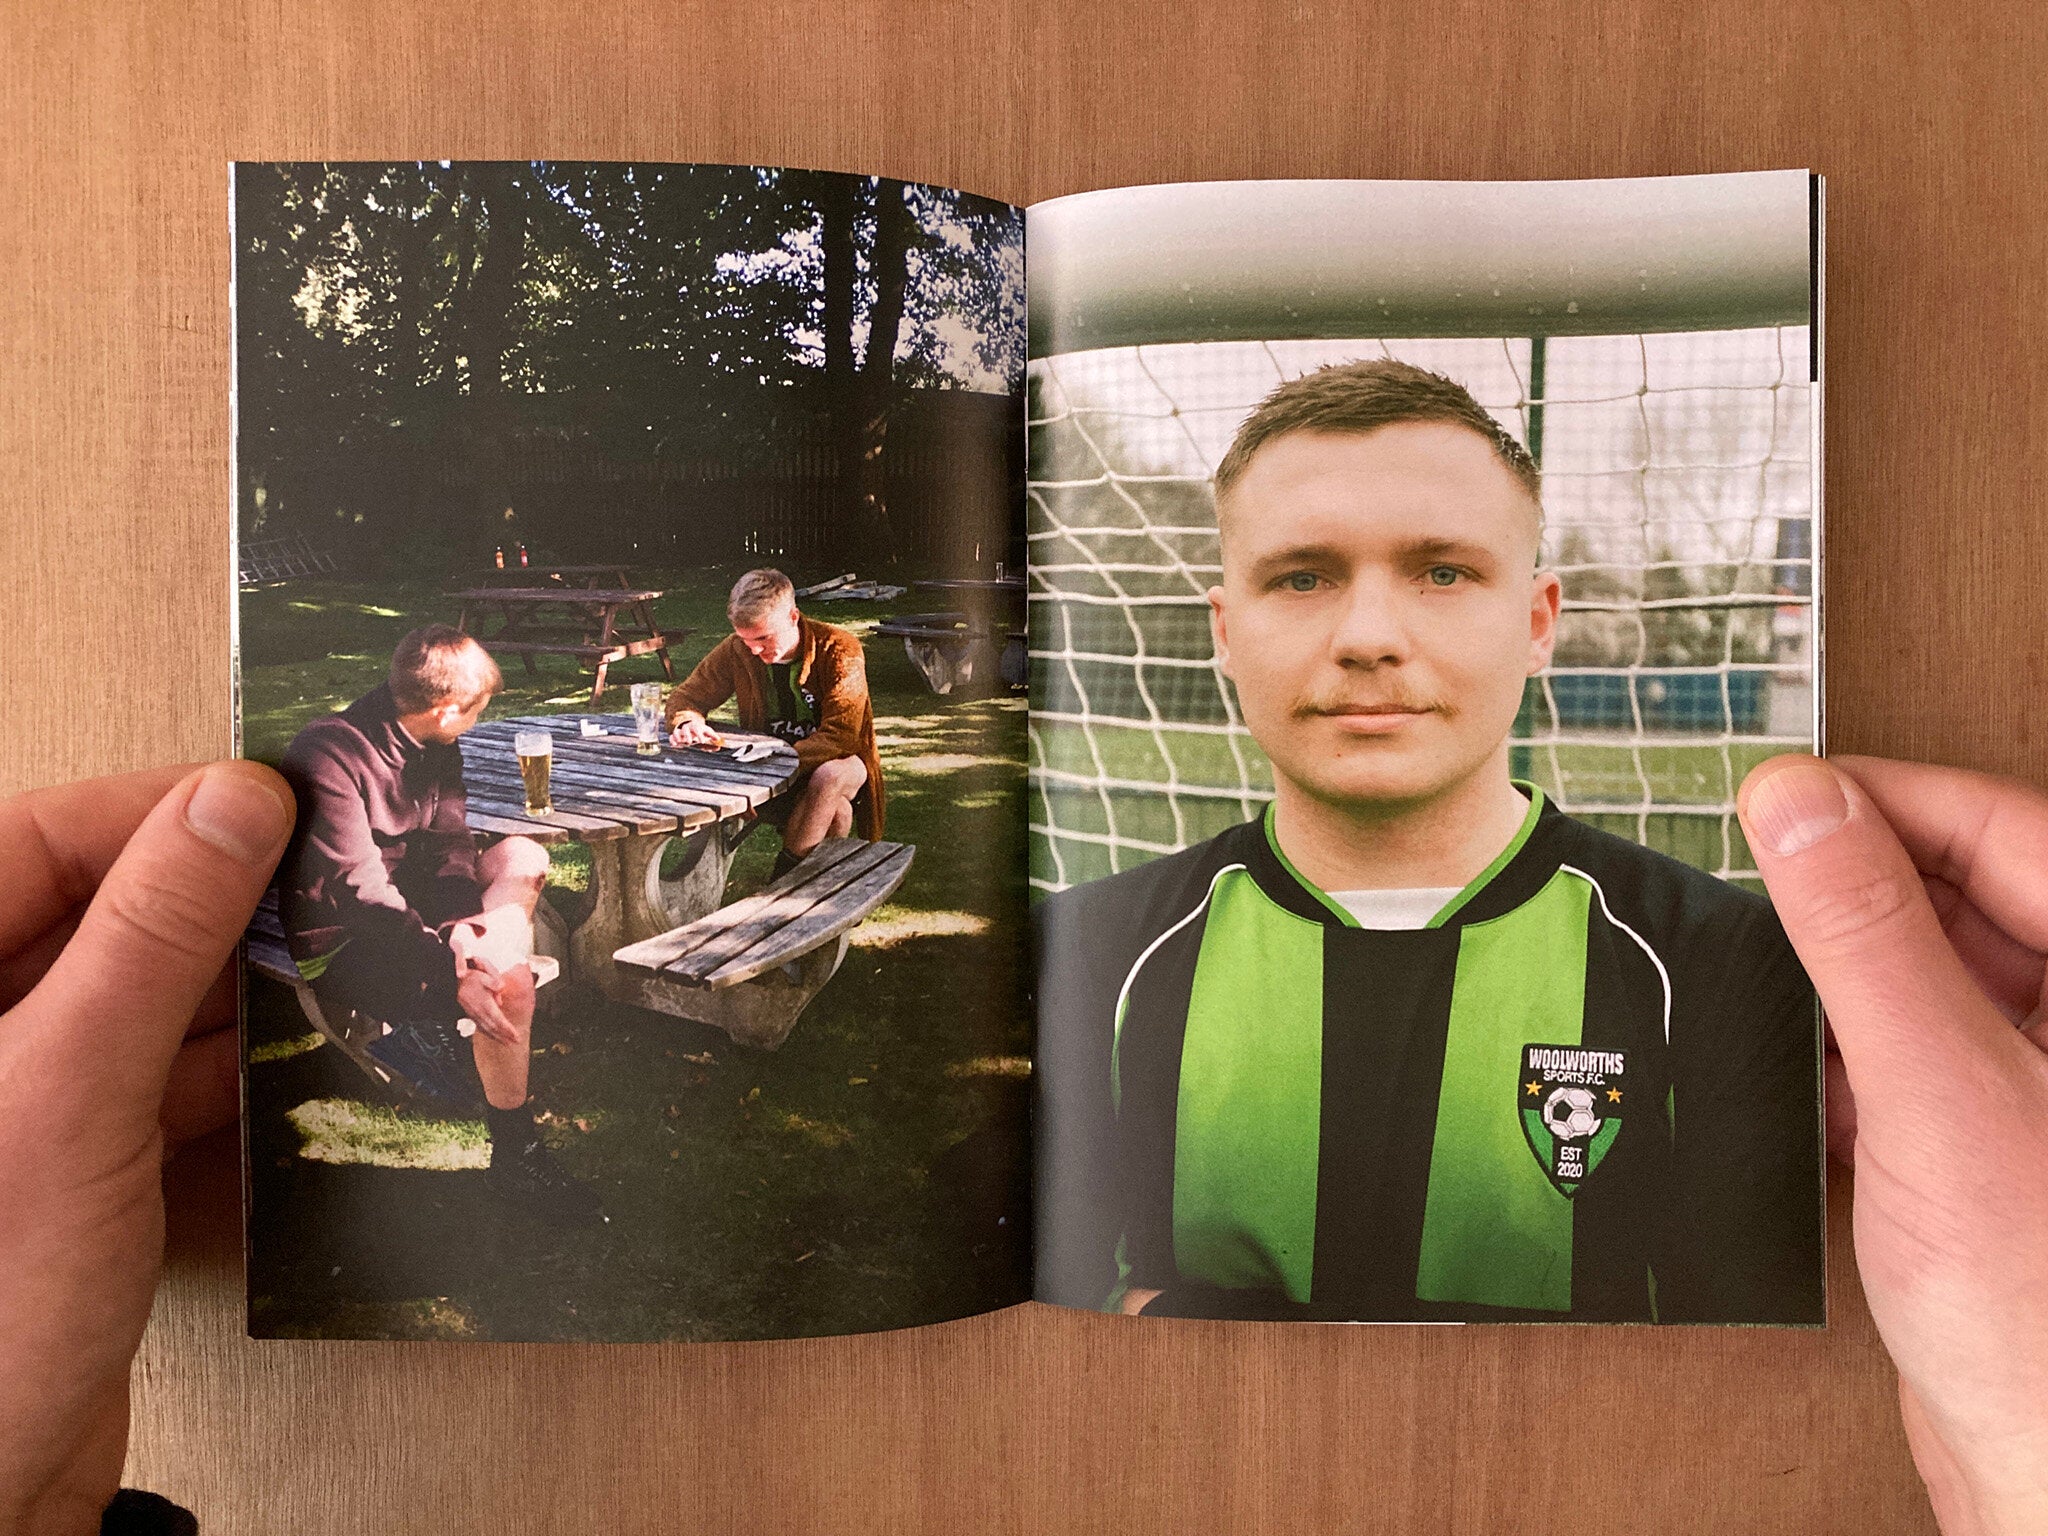 01706 ISSUE 4 - WOOLWORTHS FC: ALL OR NOTHING by Oliver Jackson